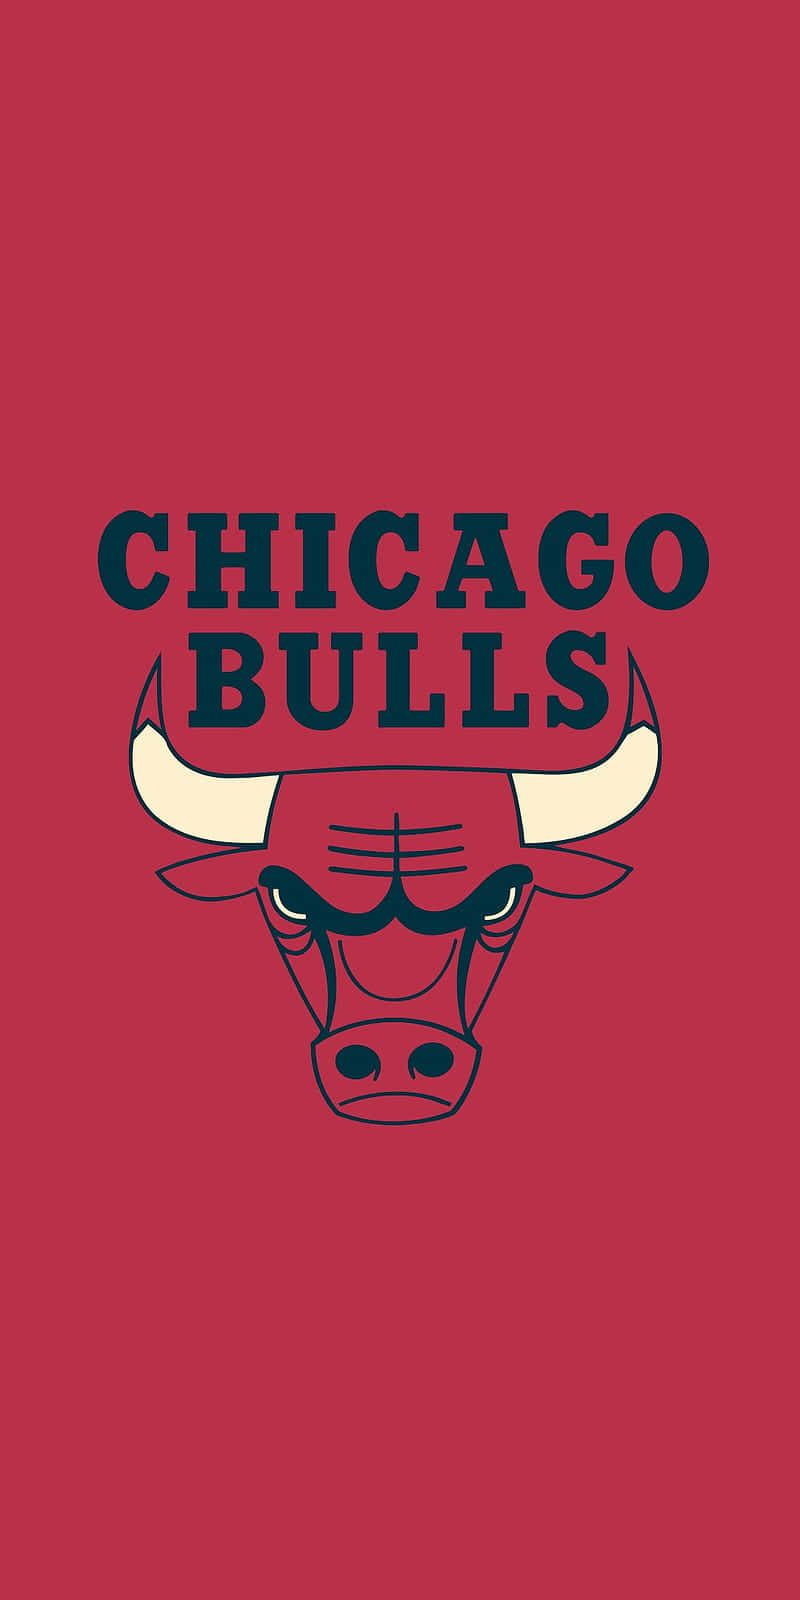 Always play with the Bulls spirit Wallpaper